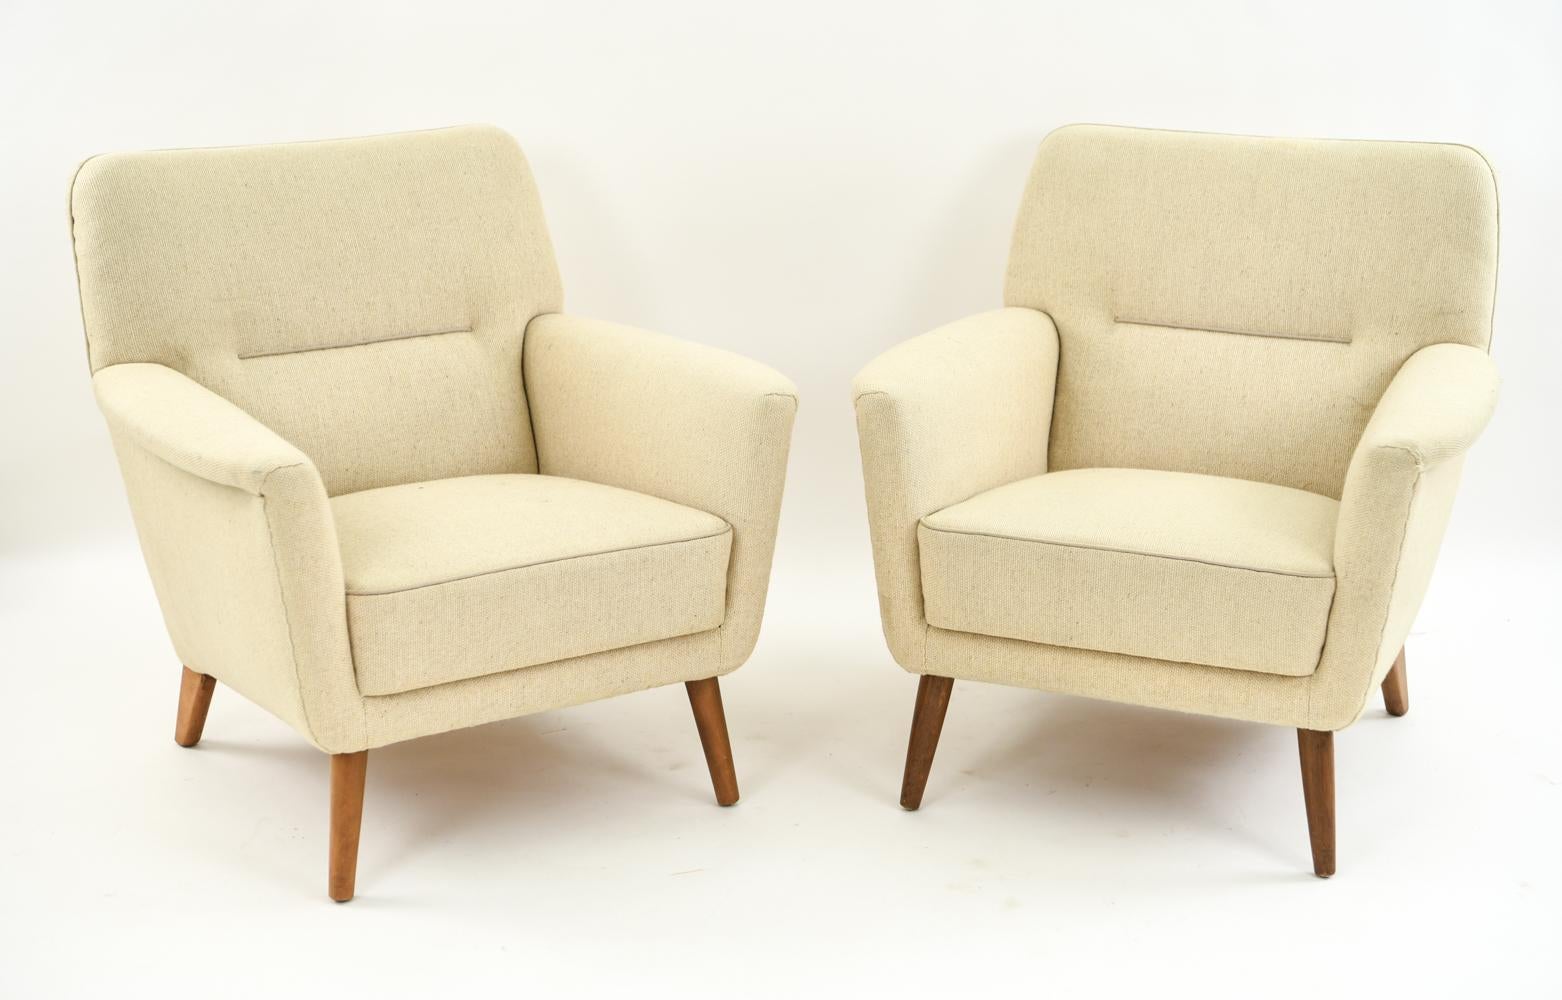 An attractive pair of Danish easy chairs by Leif Hansen in a neutral upholstery. A Classic, modern look from the 1970s.